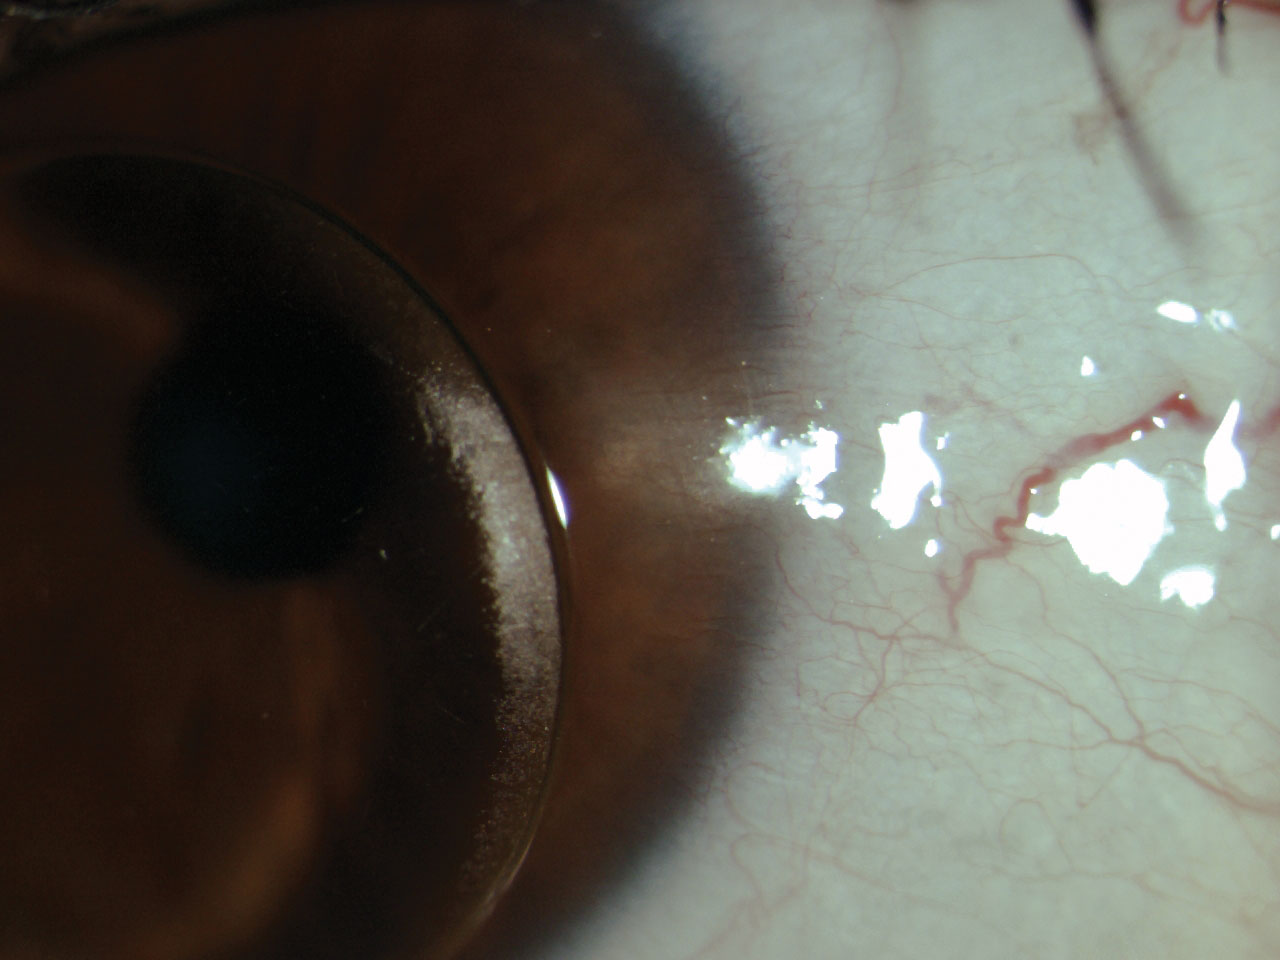 Scarring and neovascularization in the limbal region from VLK is visible.